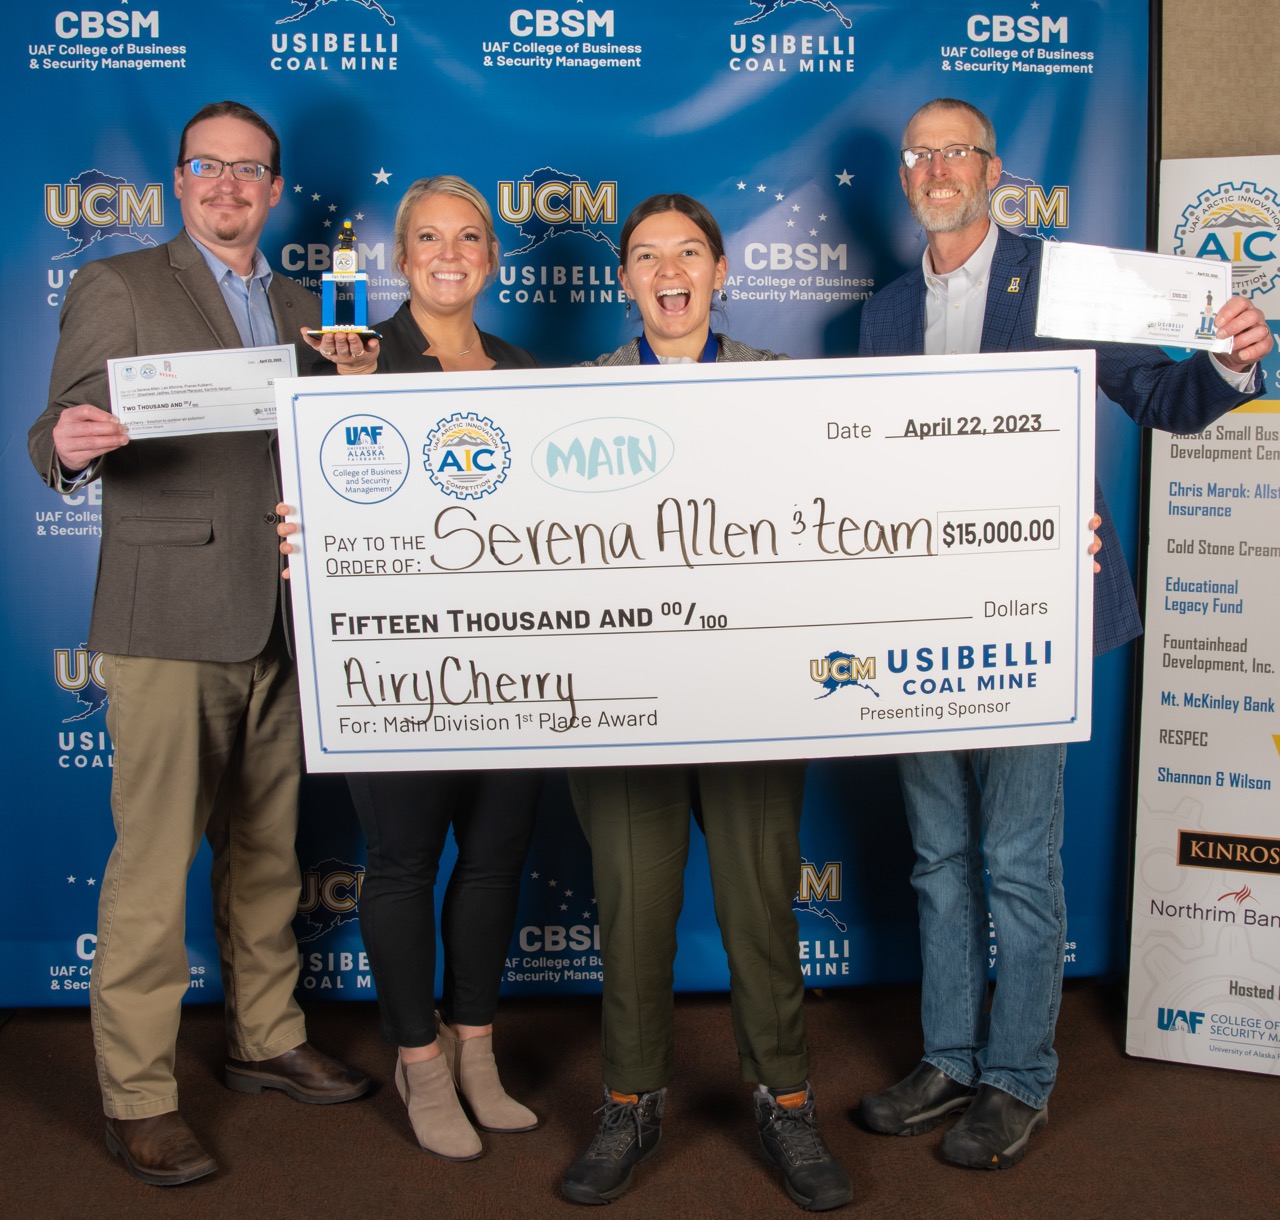 Serena Allen holds up giant check at AIC photobooth.